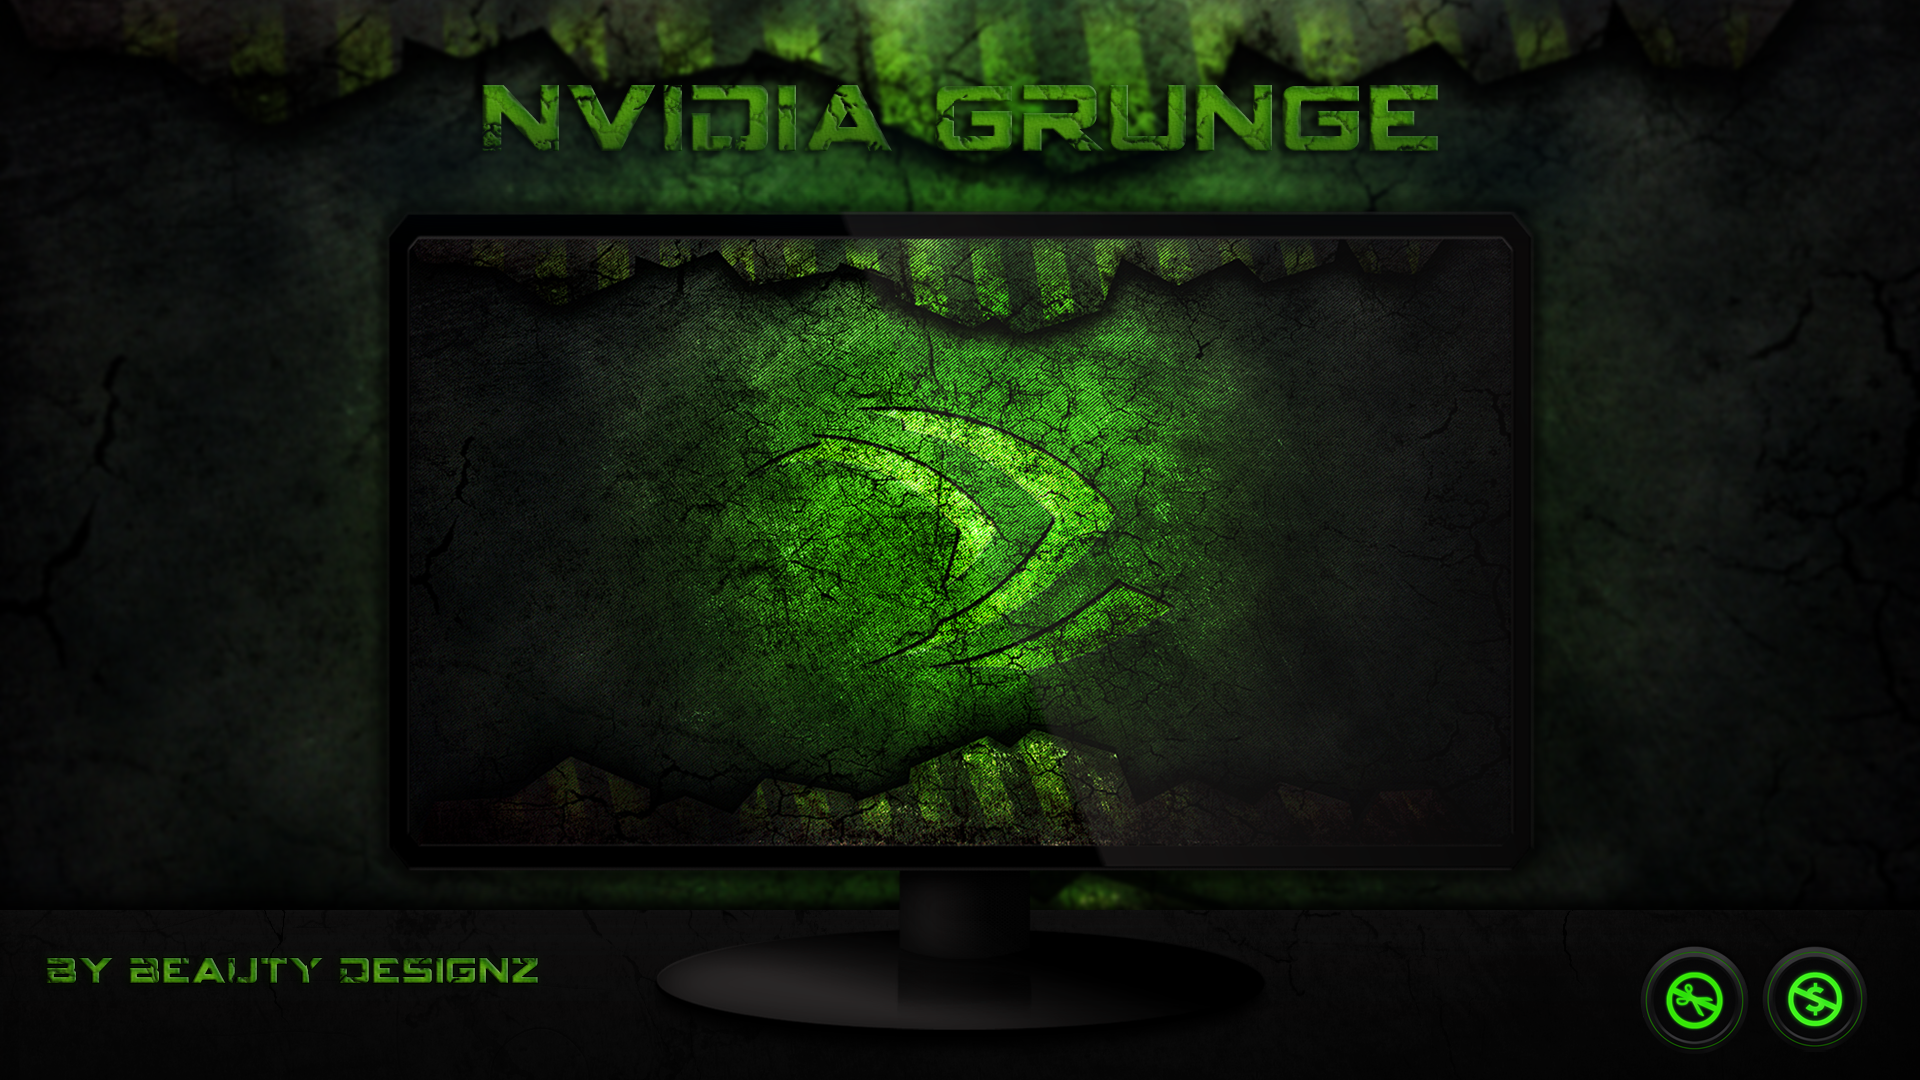 Wallpaper HDtv Widescreen Hi Guy S This A New Nvidia With